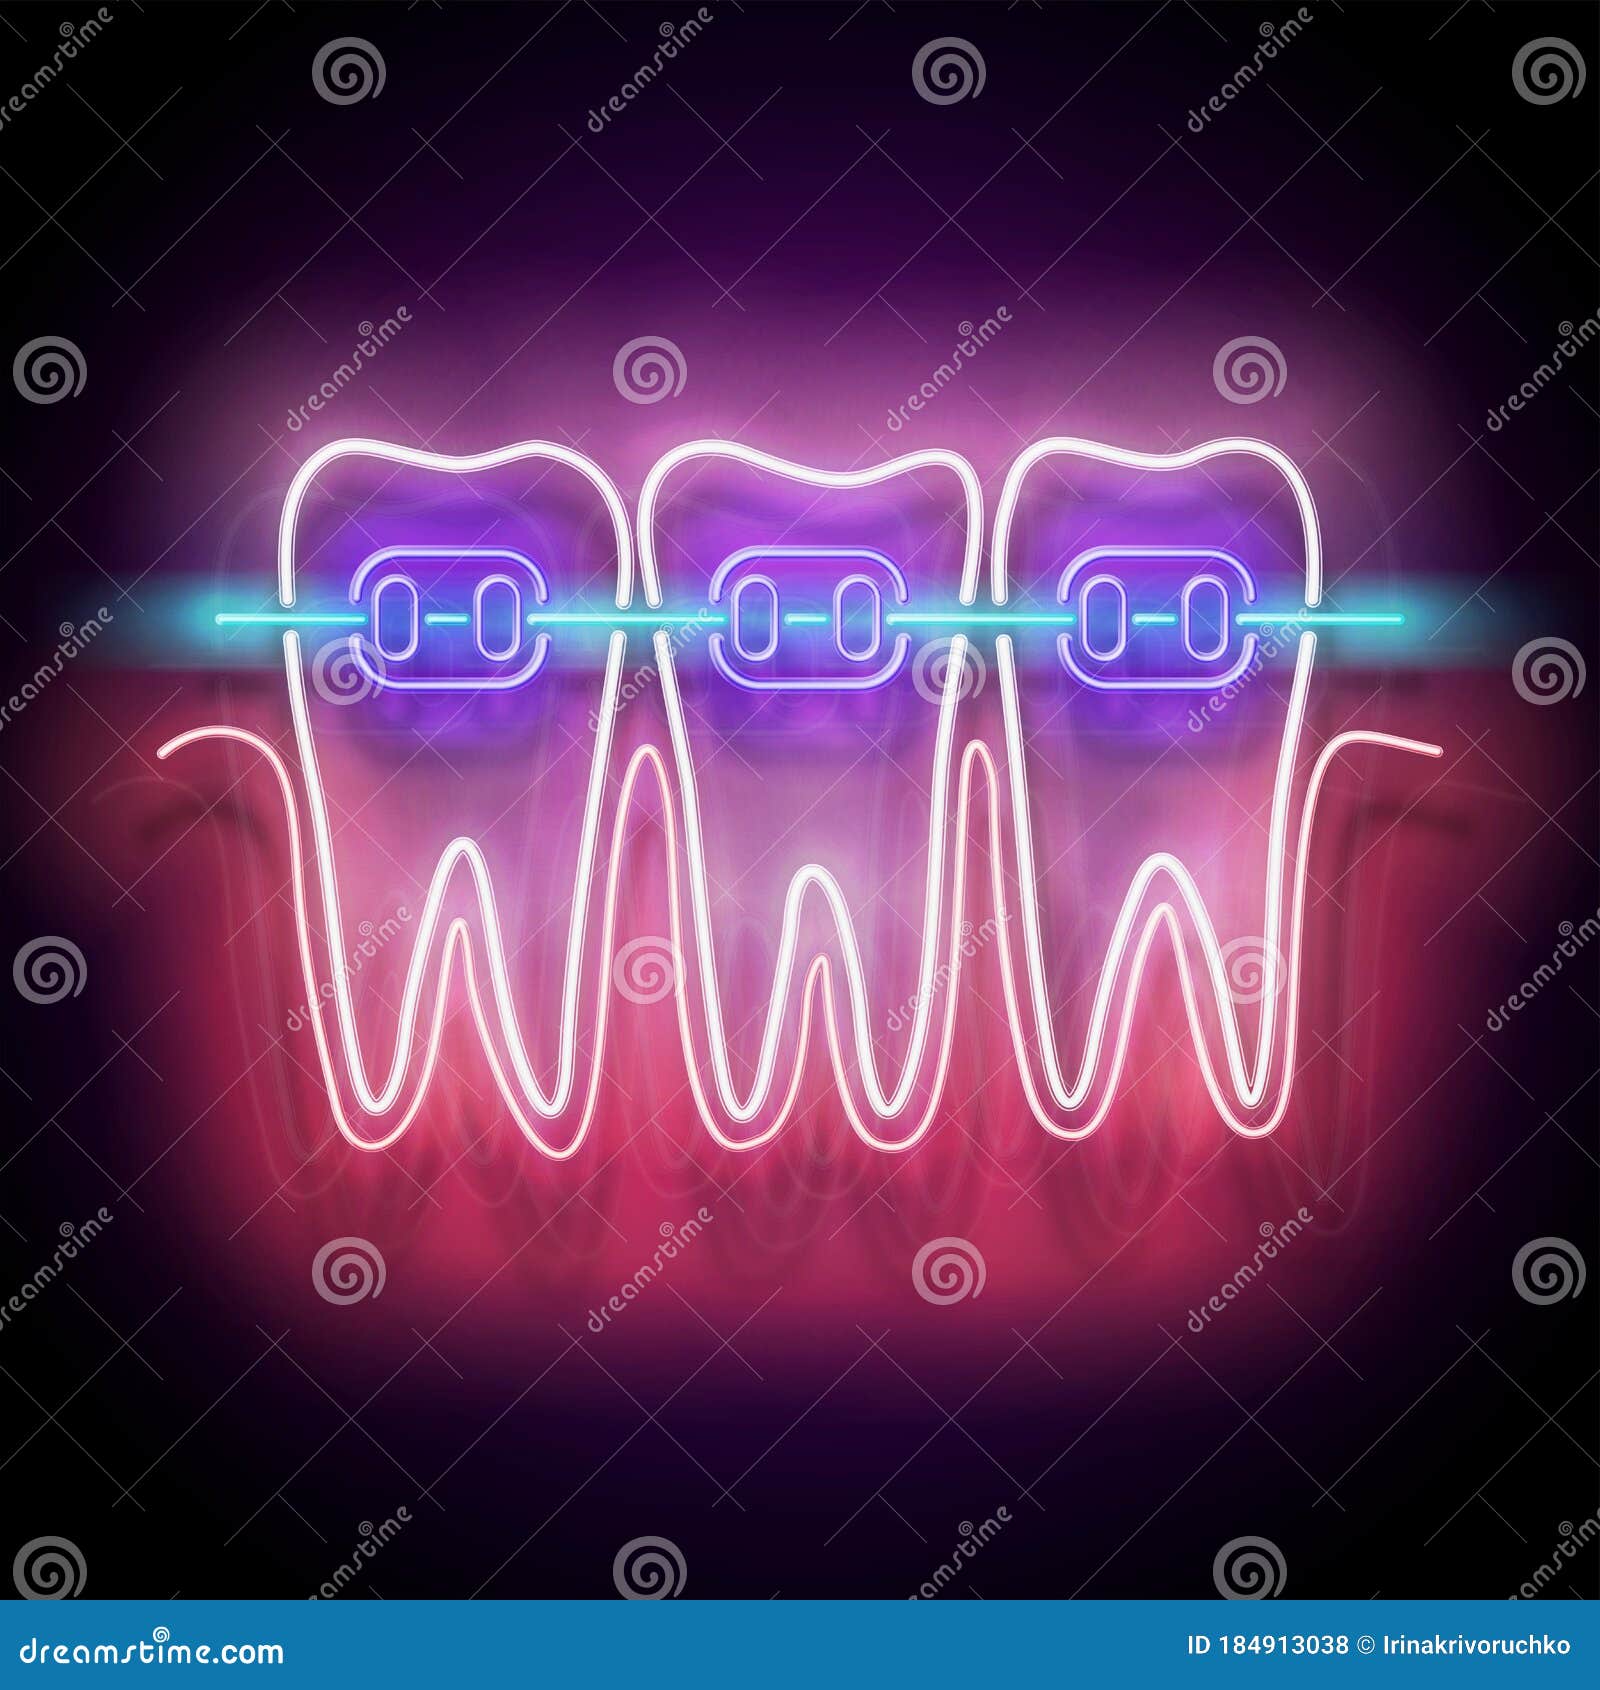 glow dentition with white teeth and braces